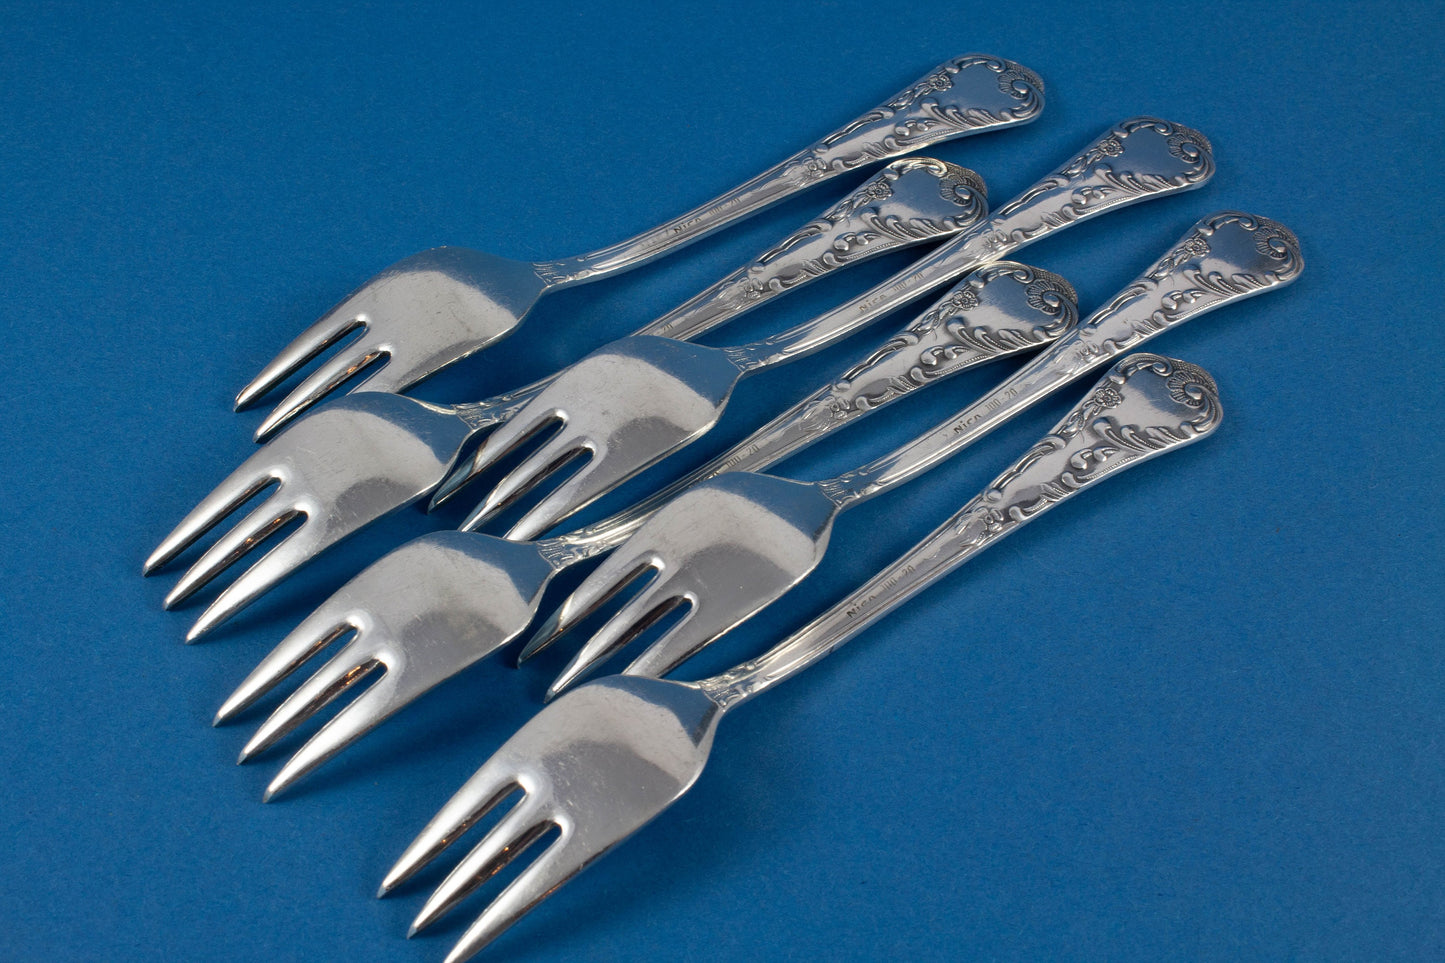 6 silver-plated cake forks and a cream spoon